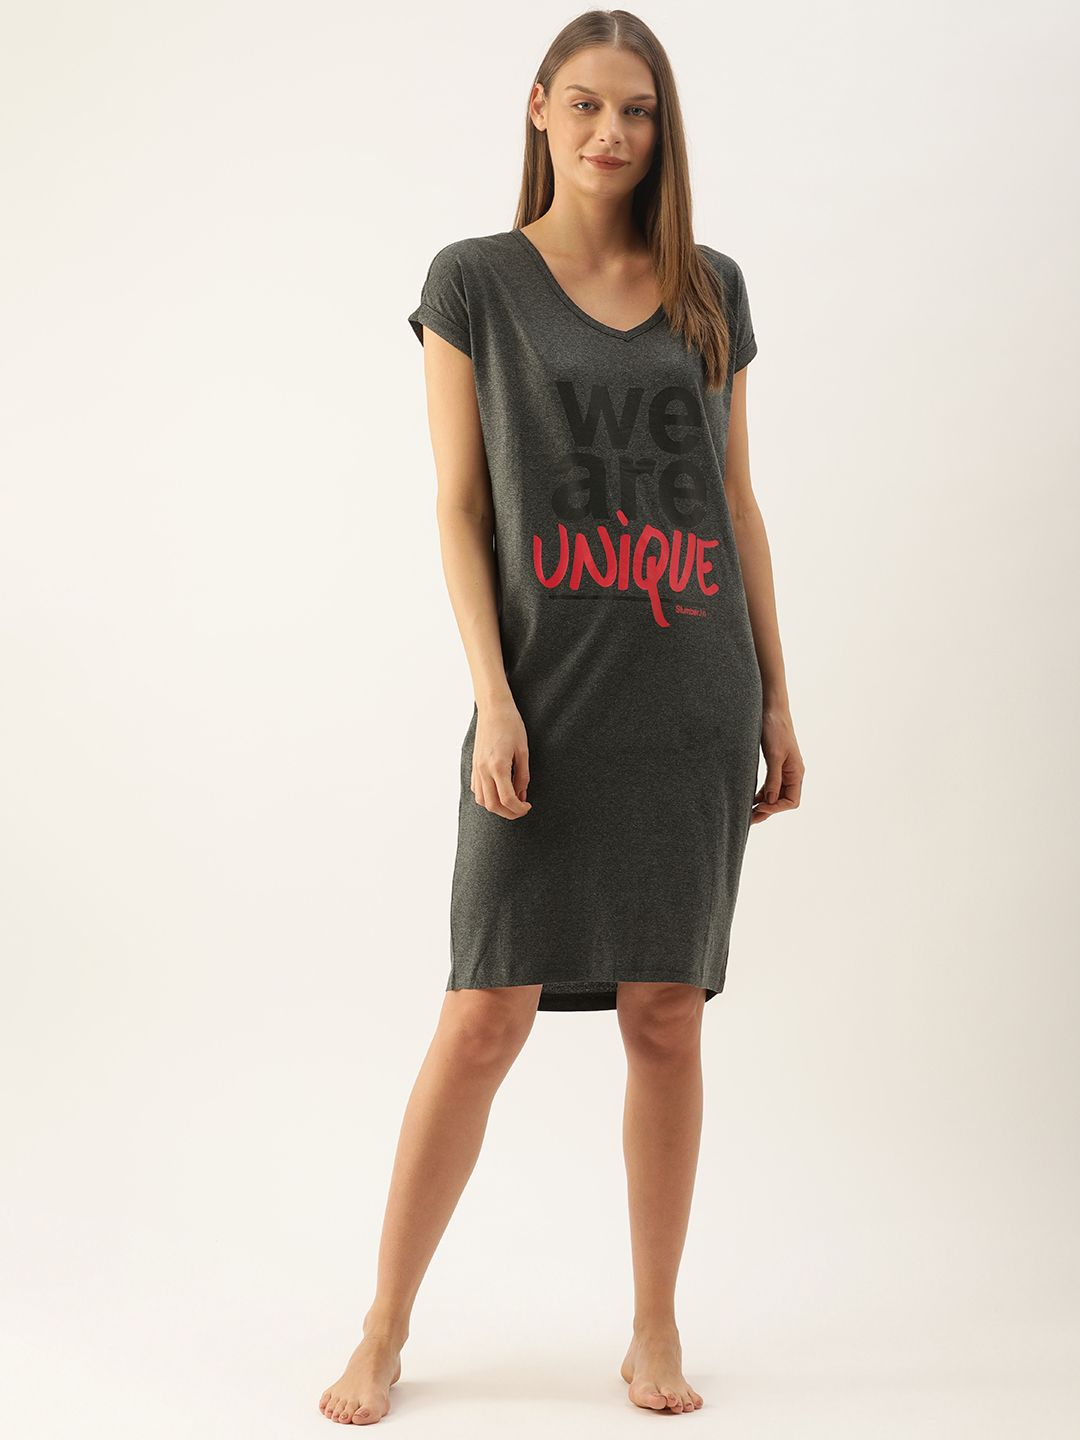 Loose Fit "We are Unique" Sleep Shirt - Colour Charcoal